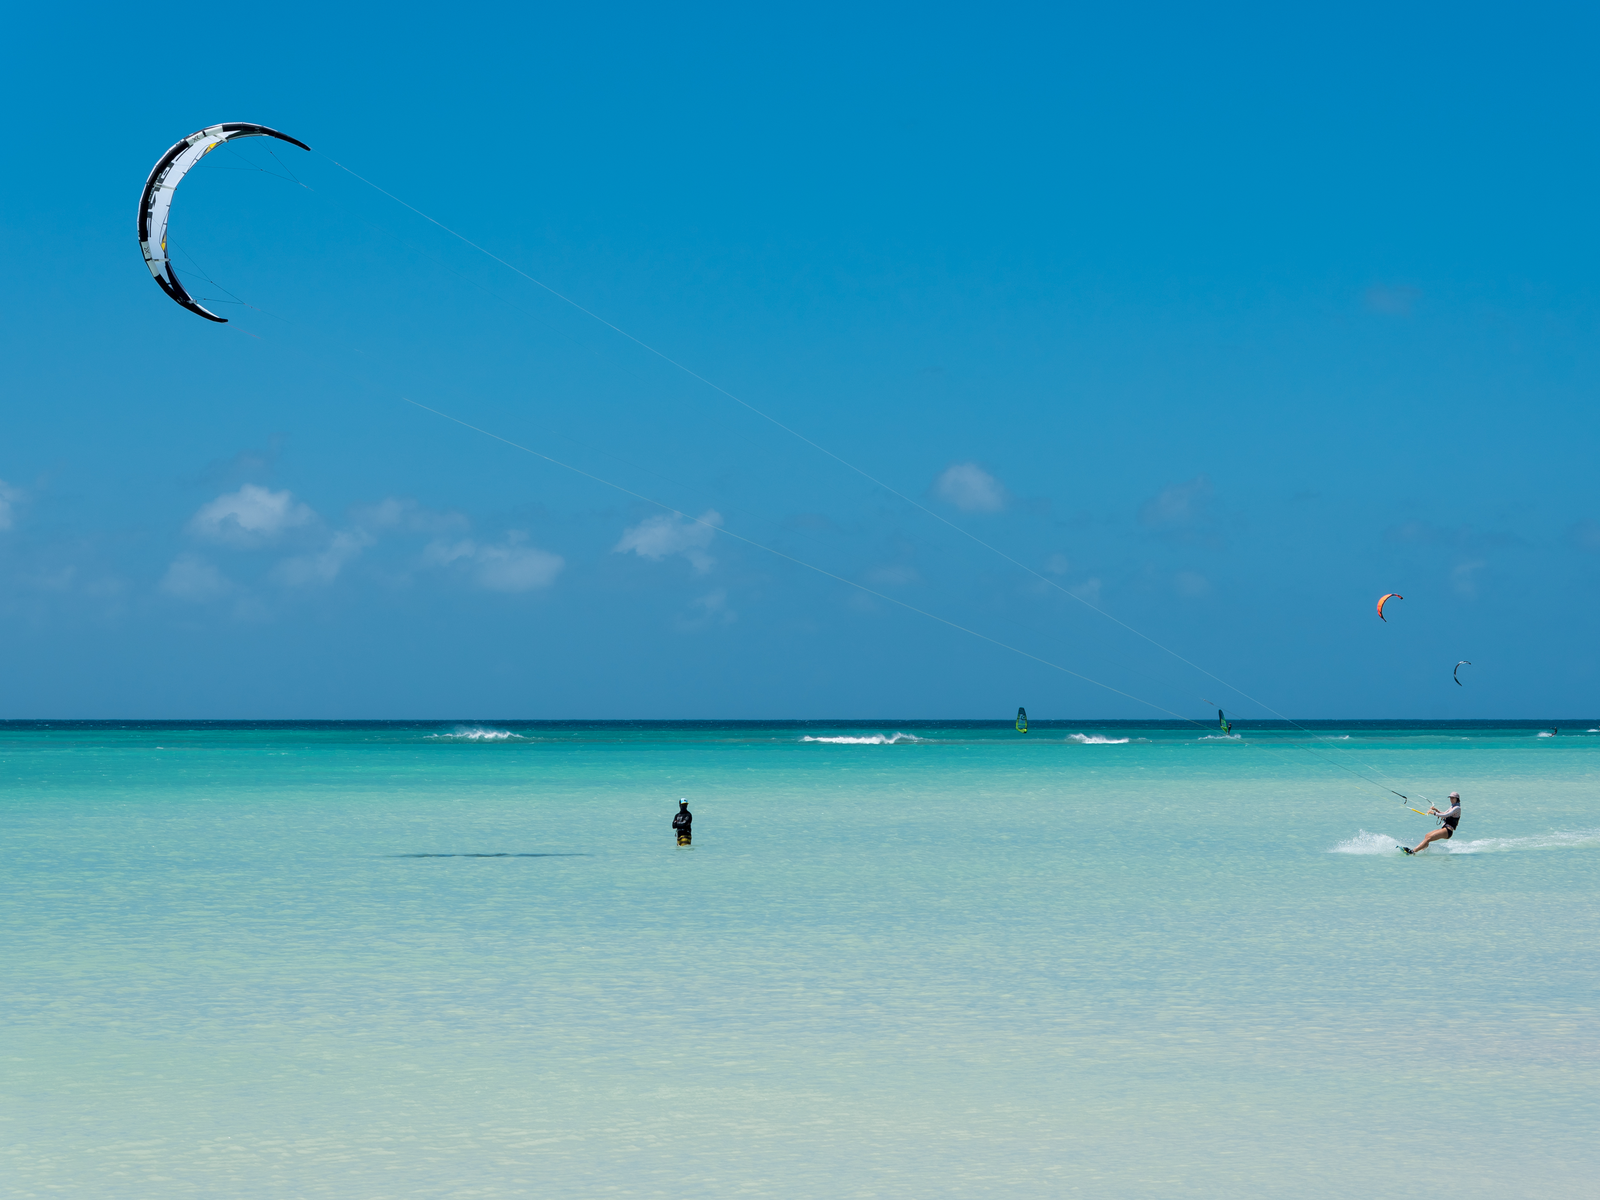 Several people Kiteboarding at the perfect spot for windsurfing and kitesurfing in one of the best beaches in Aruba, Hadicurari Beach during a bright sunny day